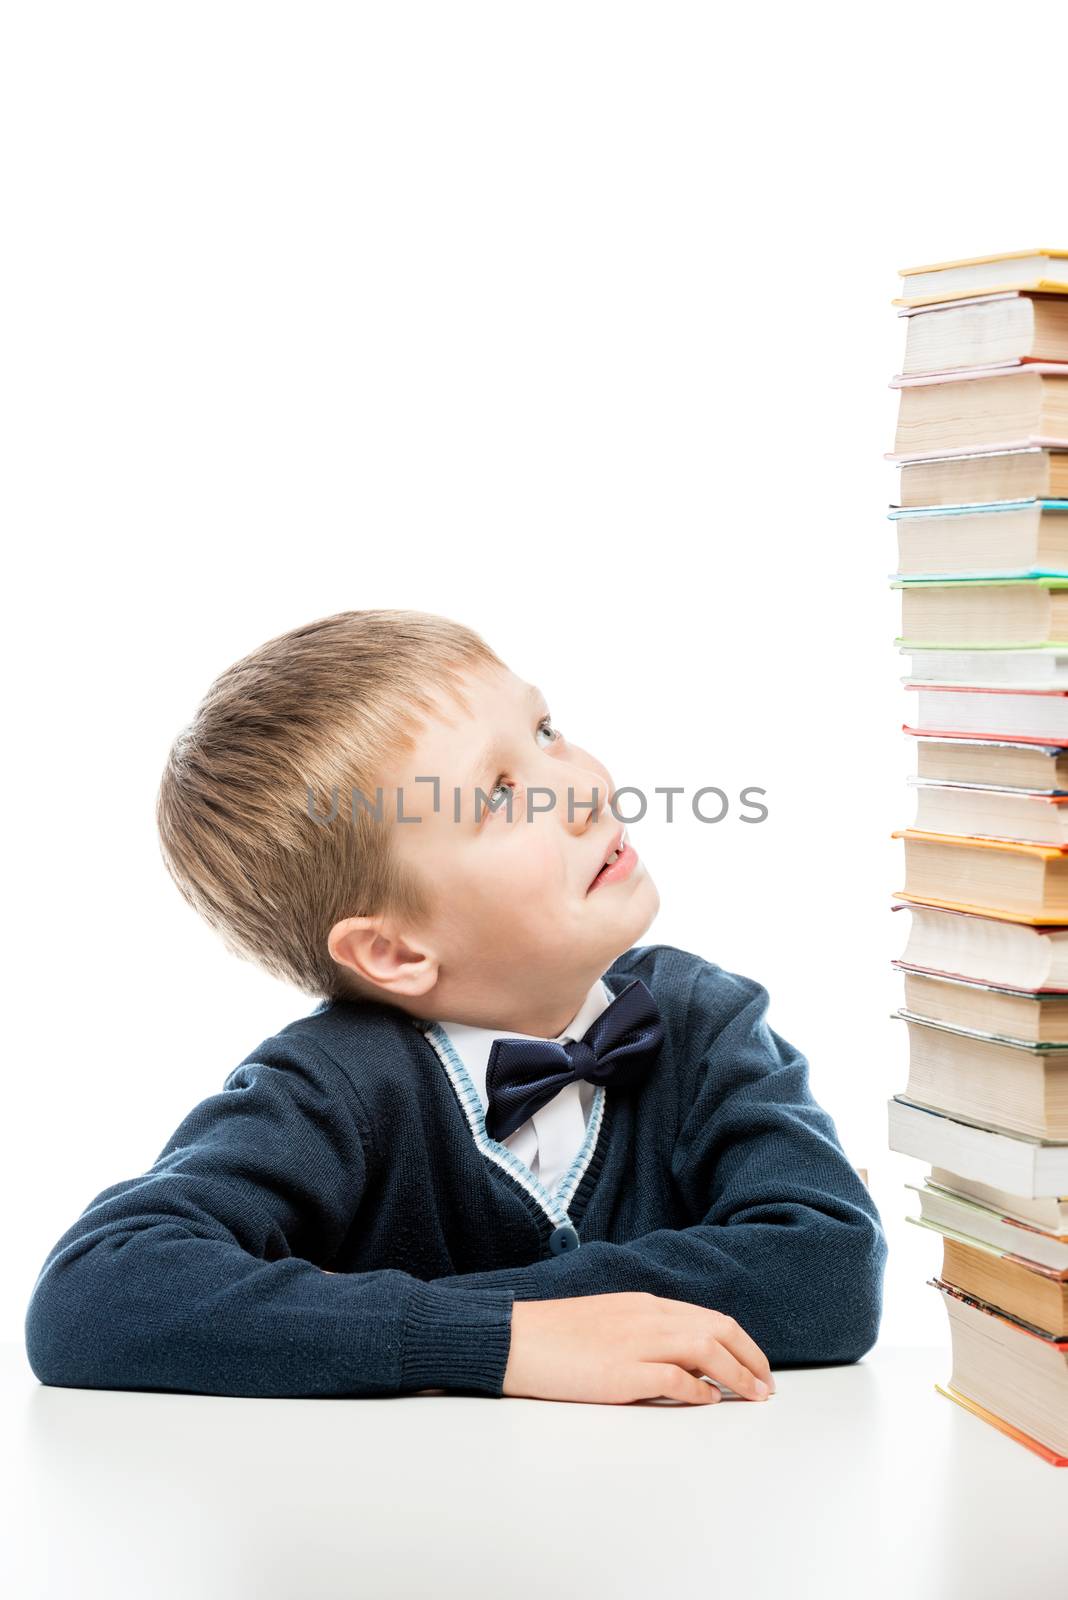 the schoolboy looks at the heap of books on the table